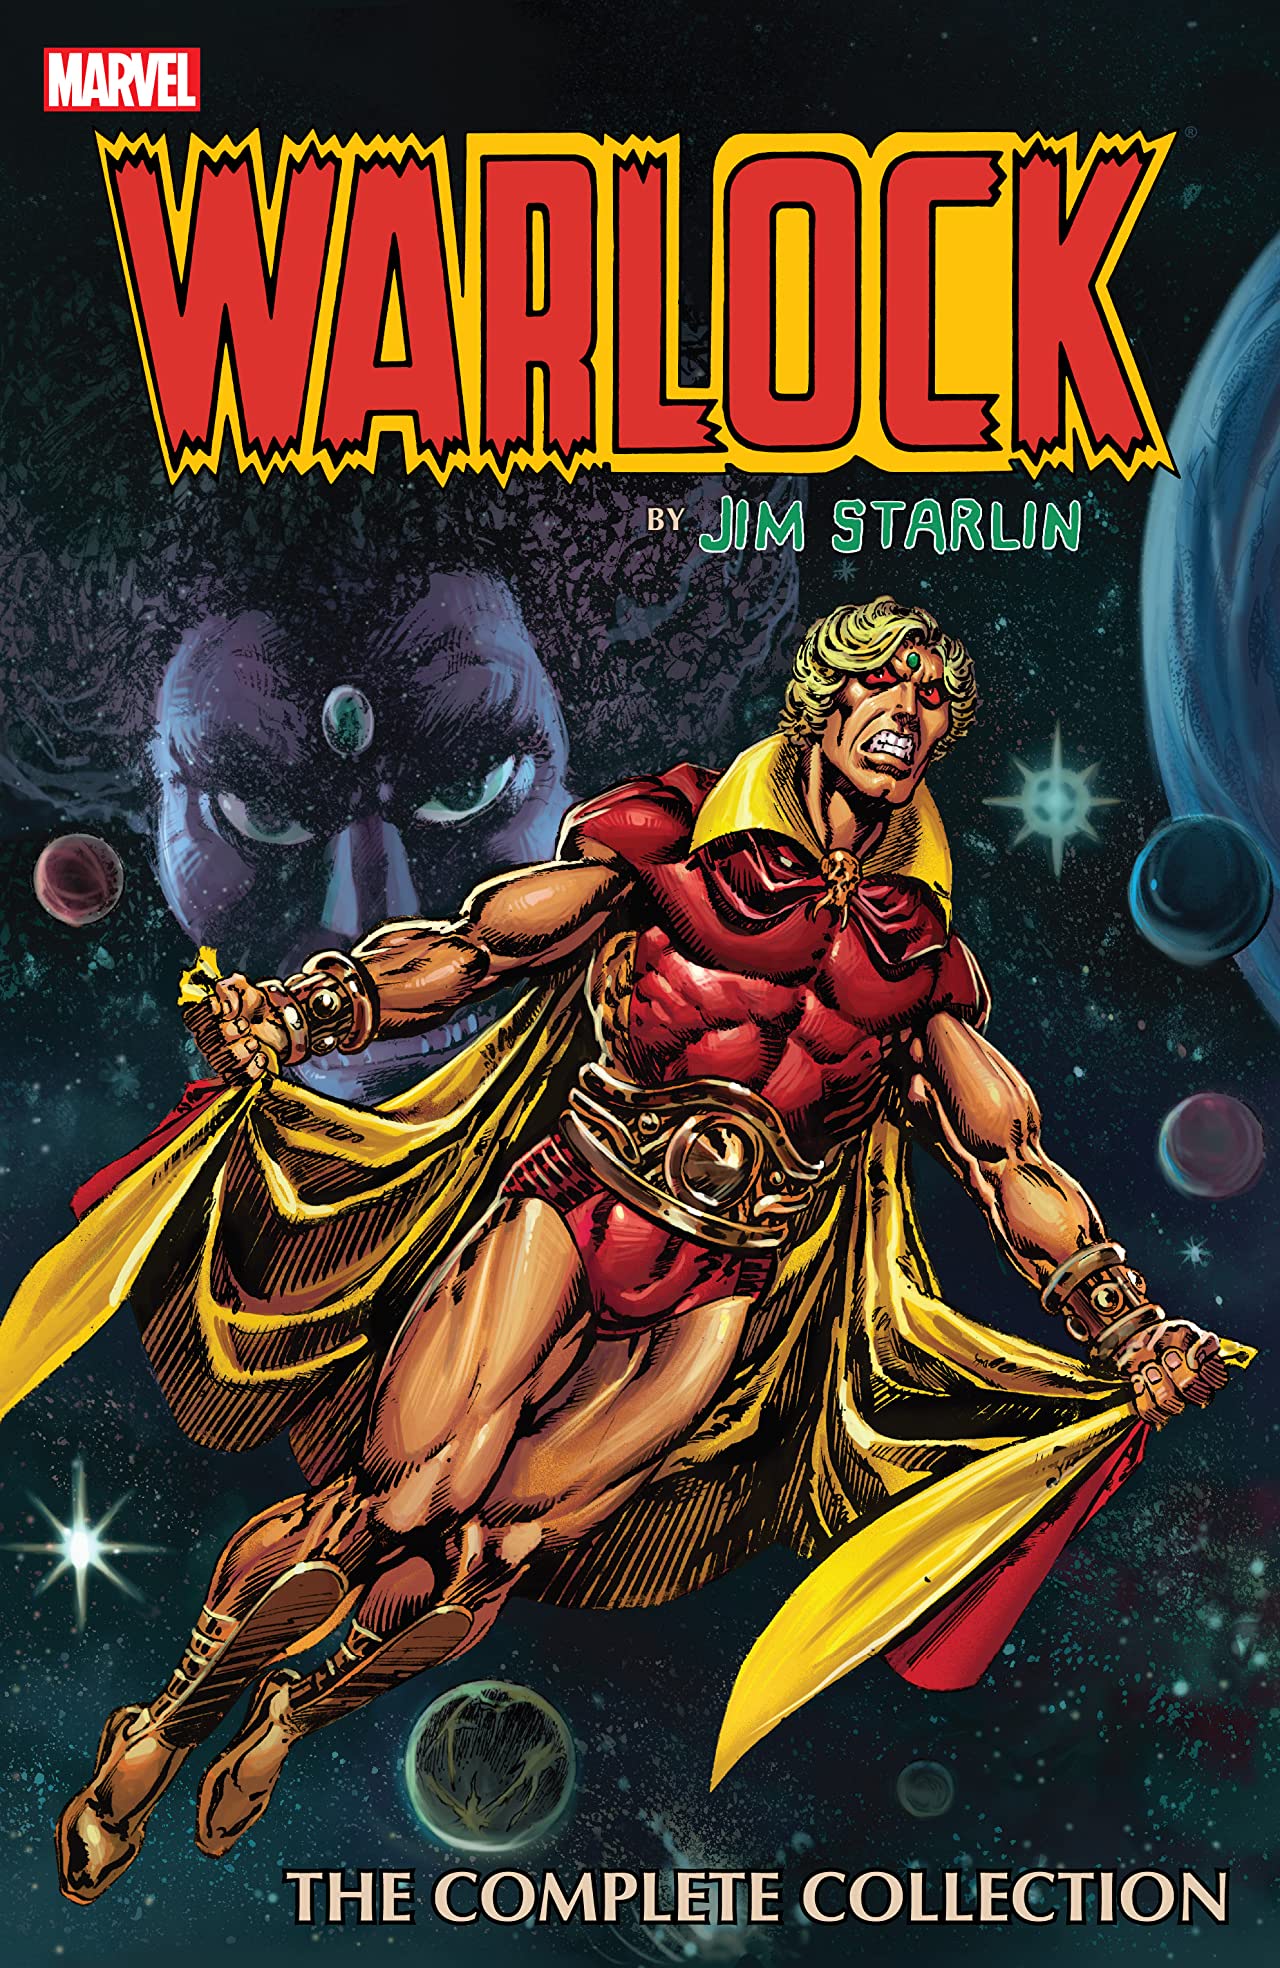 Warlock by Jim Starlin - The Complete Collection